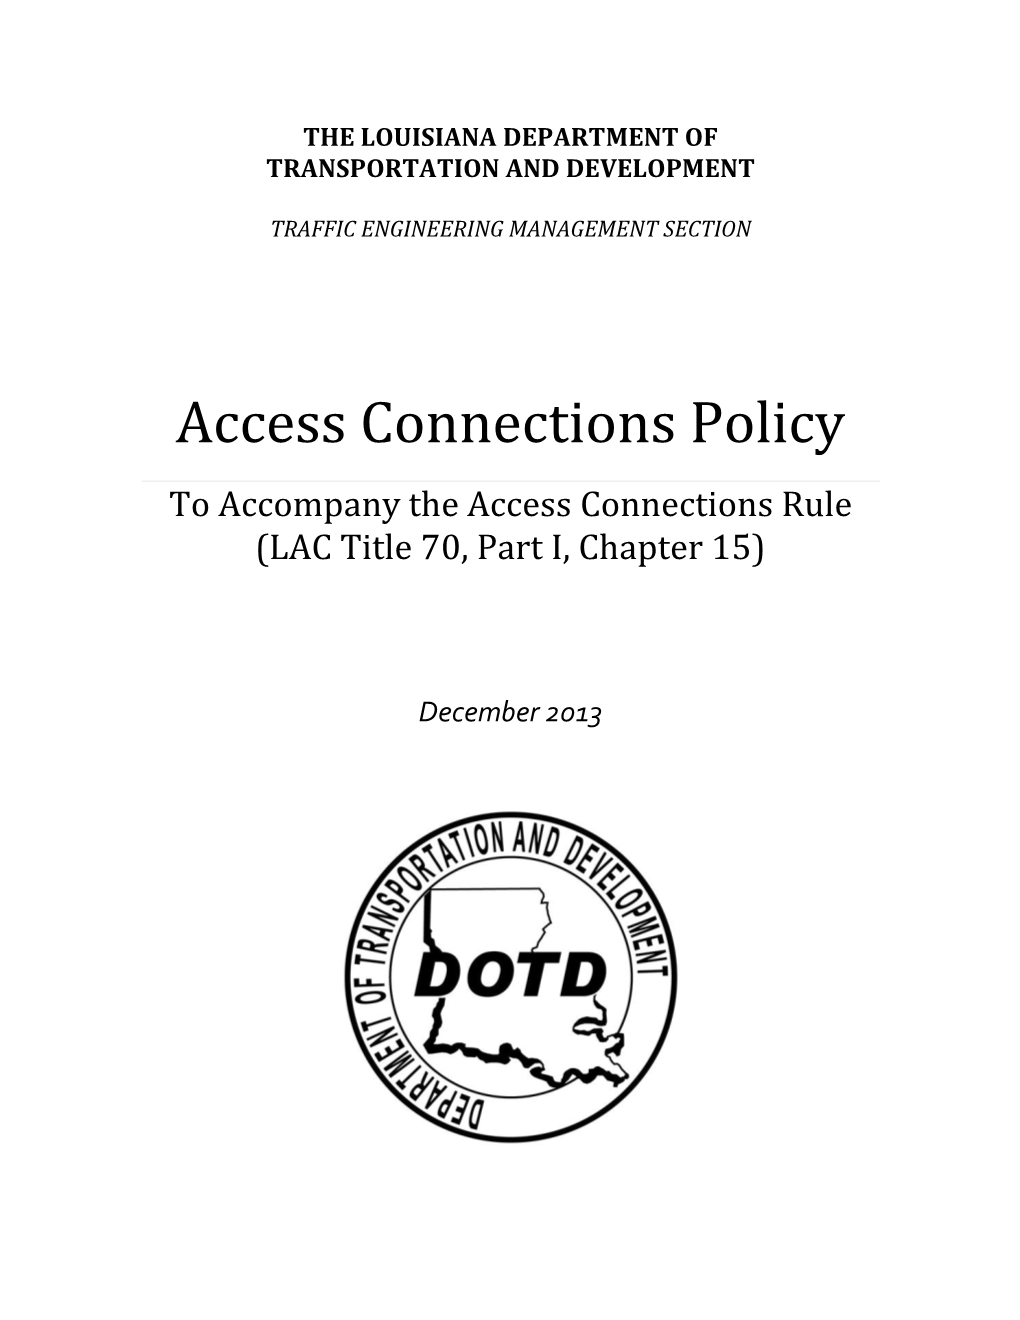 Access Connections Policy (December 2013)